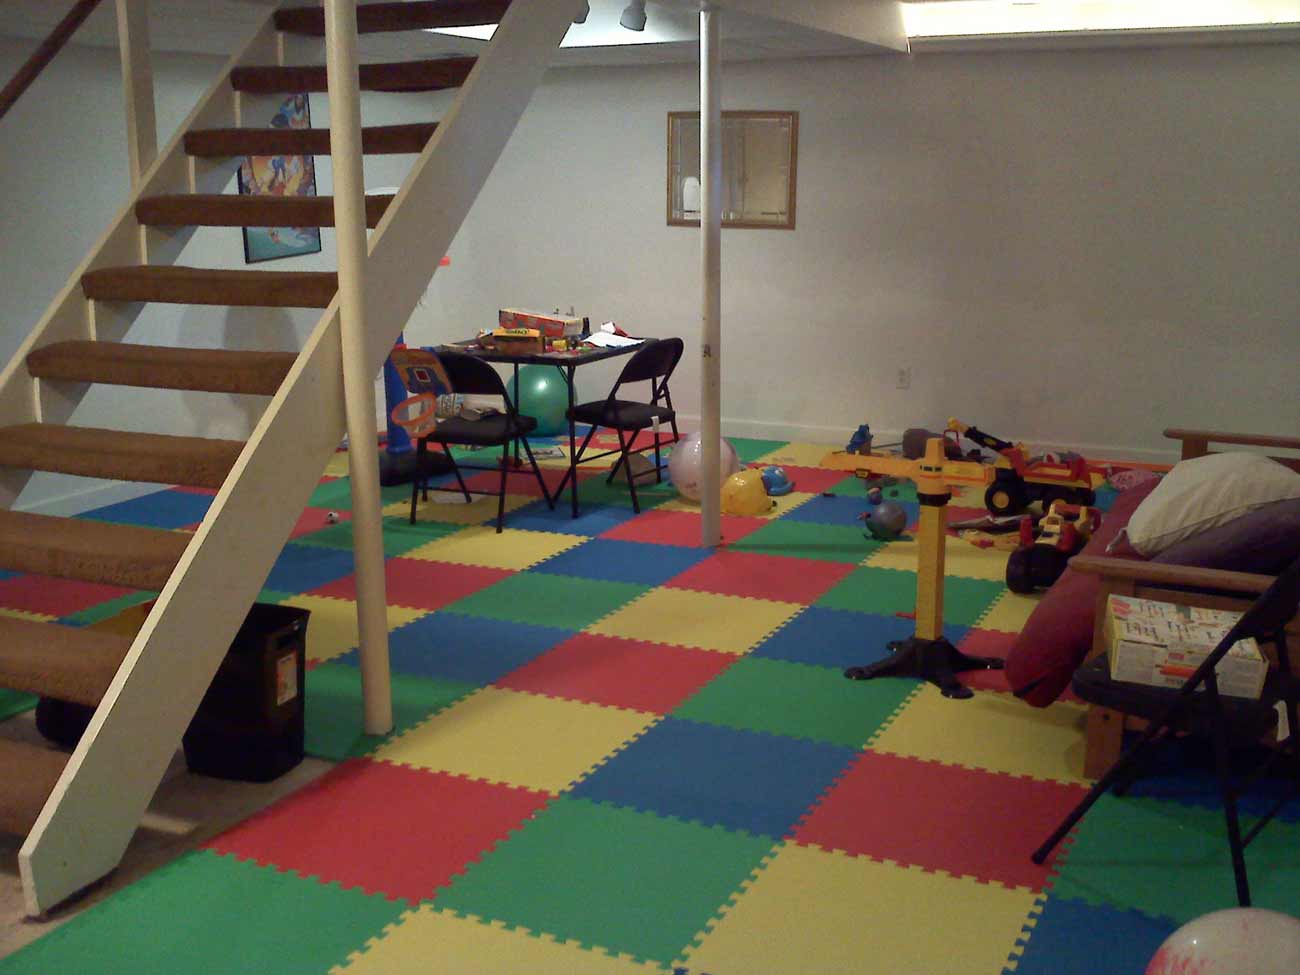 Finishing Ideas Lego Astounding Basement Finishing Ideas With Colorful Lego Carpet Design For Kids Playroom Decorated In Modern Minimalist Style Basement Basement Finishing Ideas Leading To Stunning Results